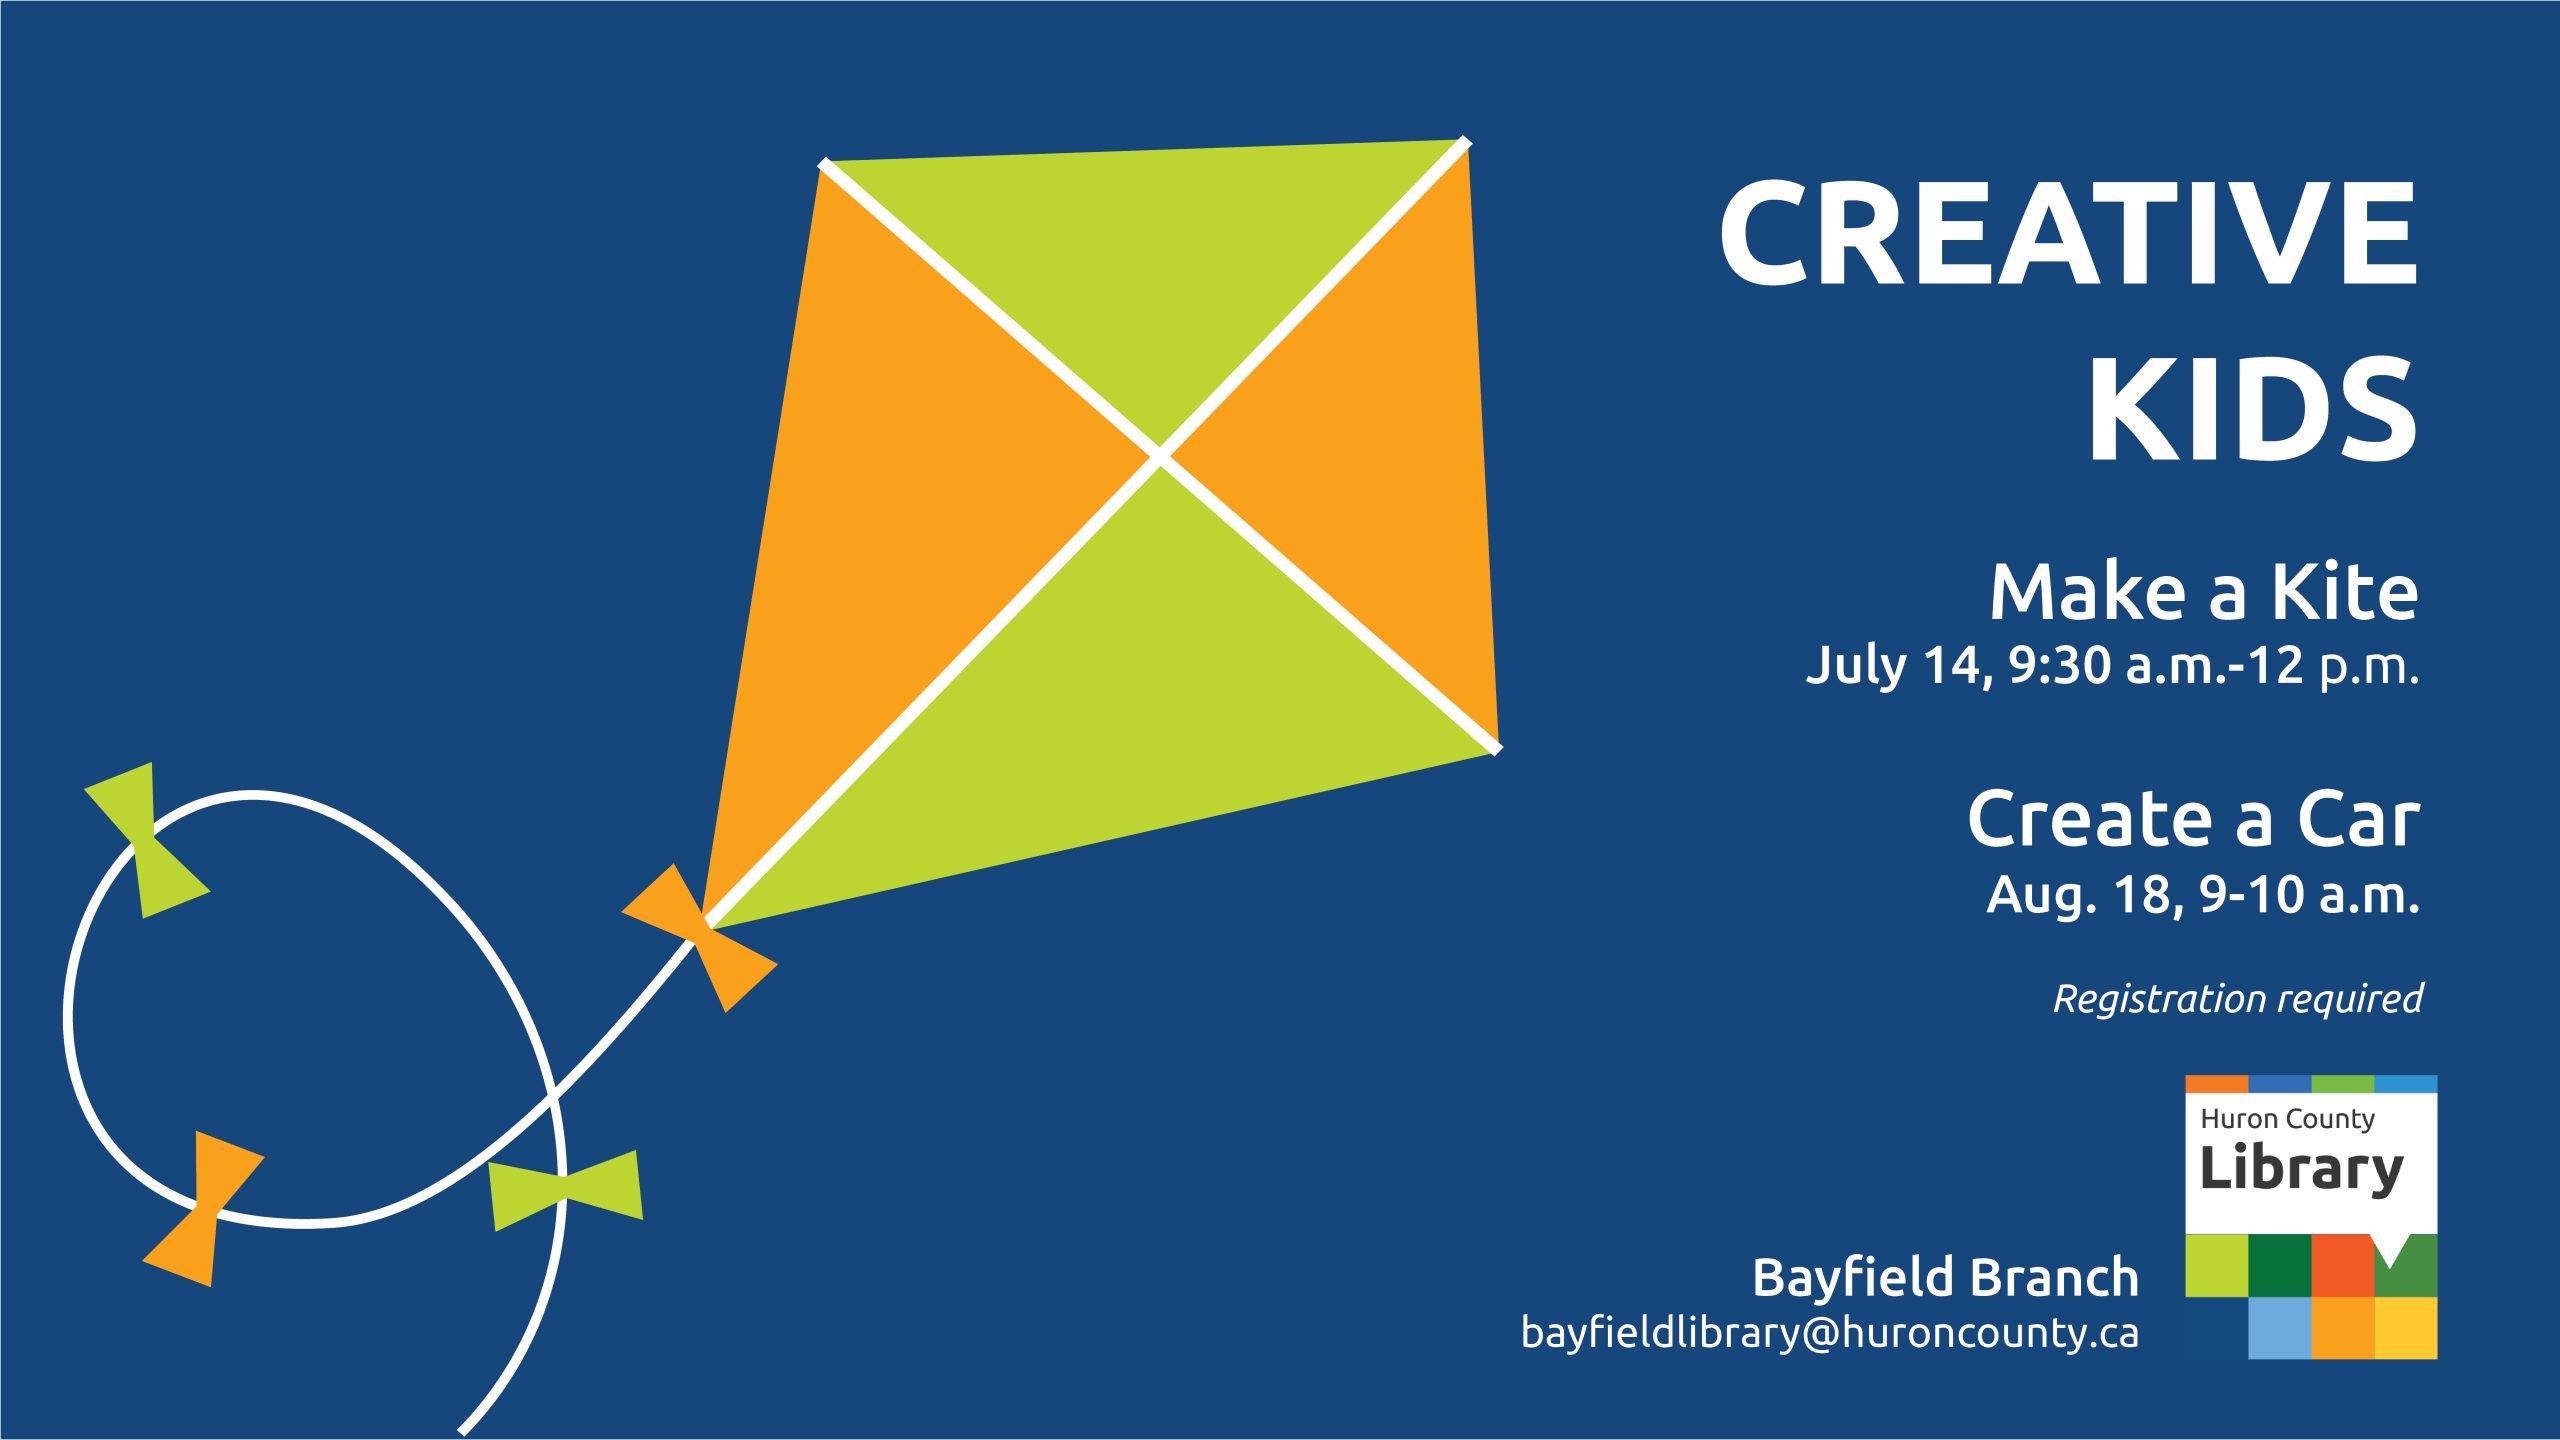 Illustration of a kite with text promoting Creative Kids program at Bayfield Branch